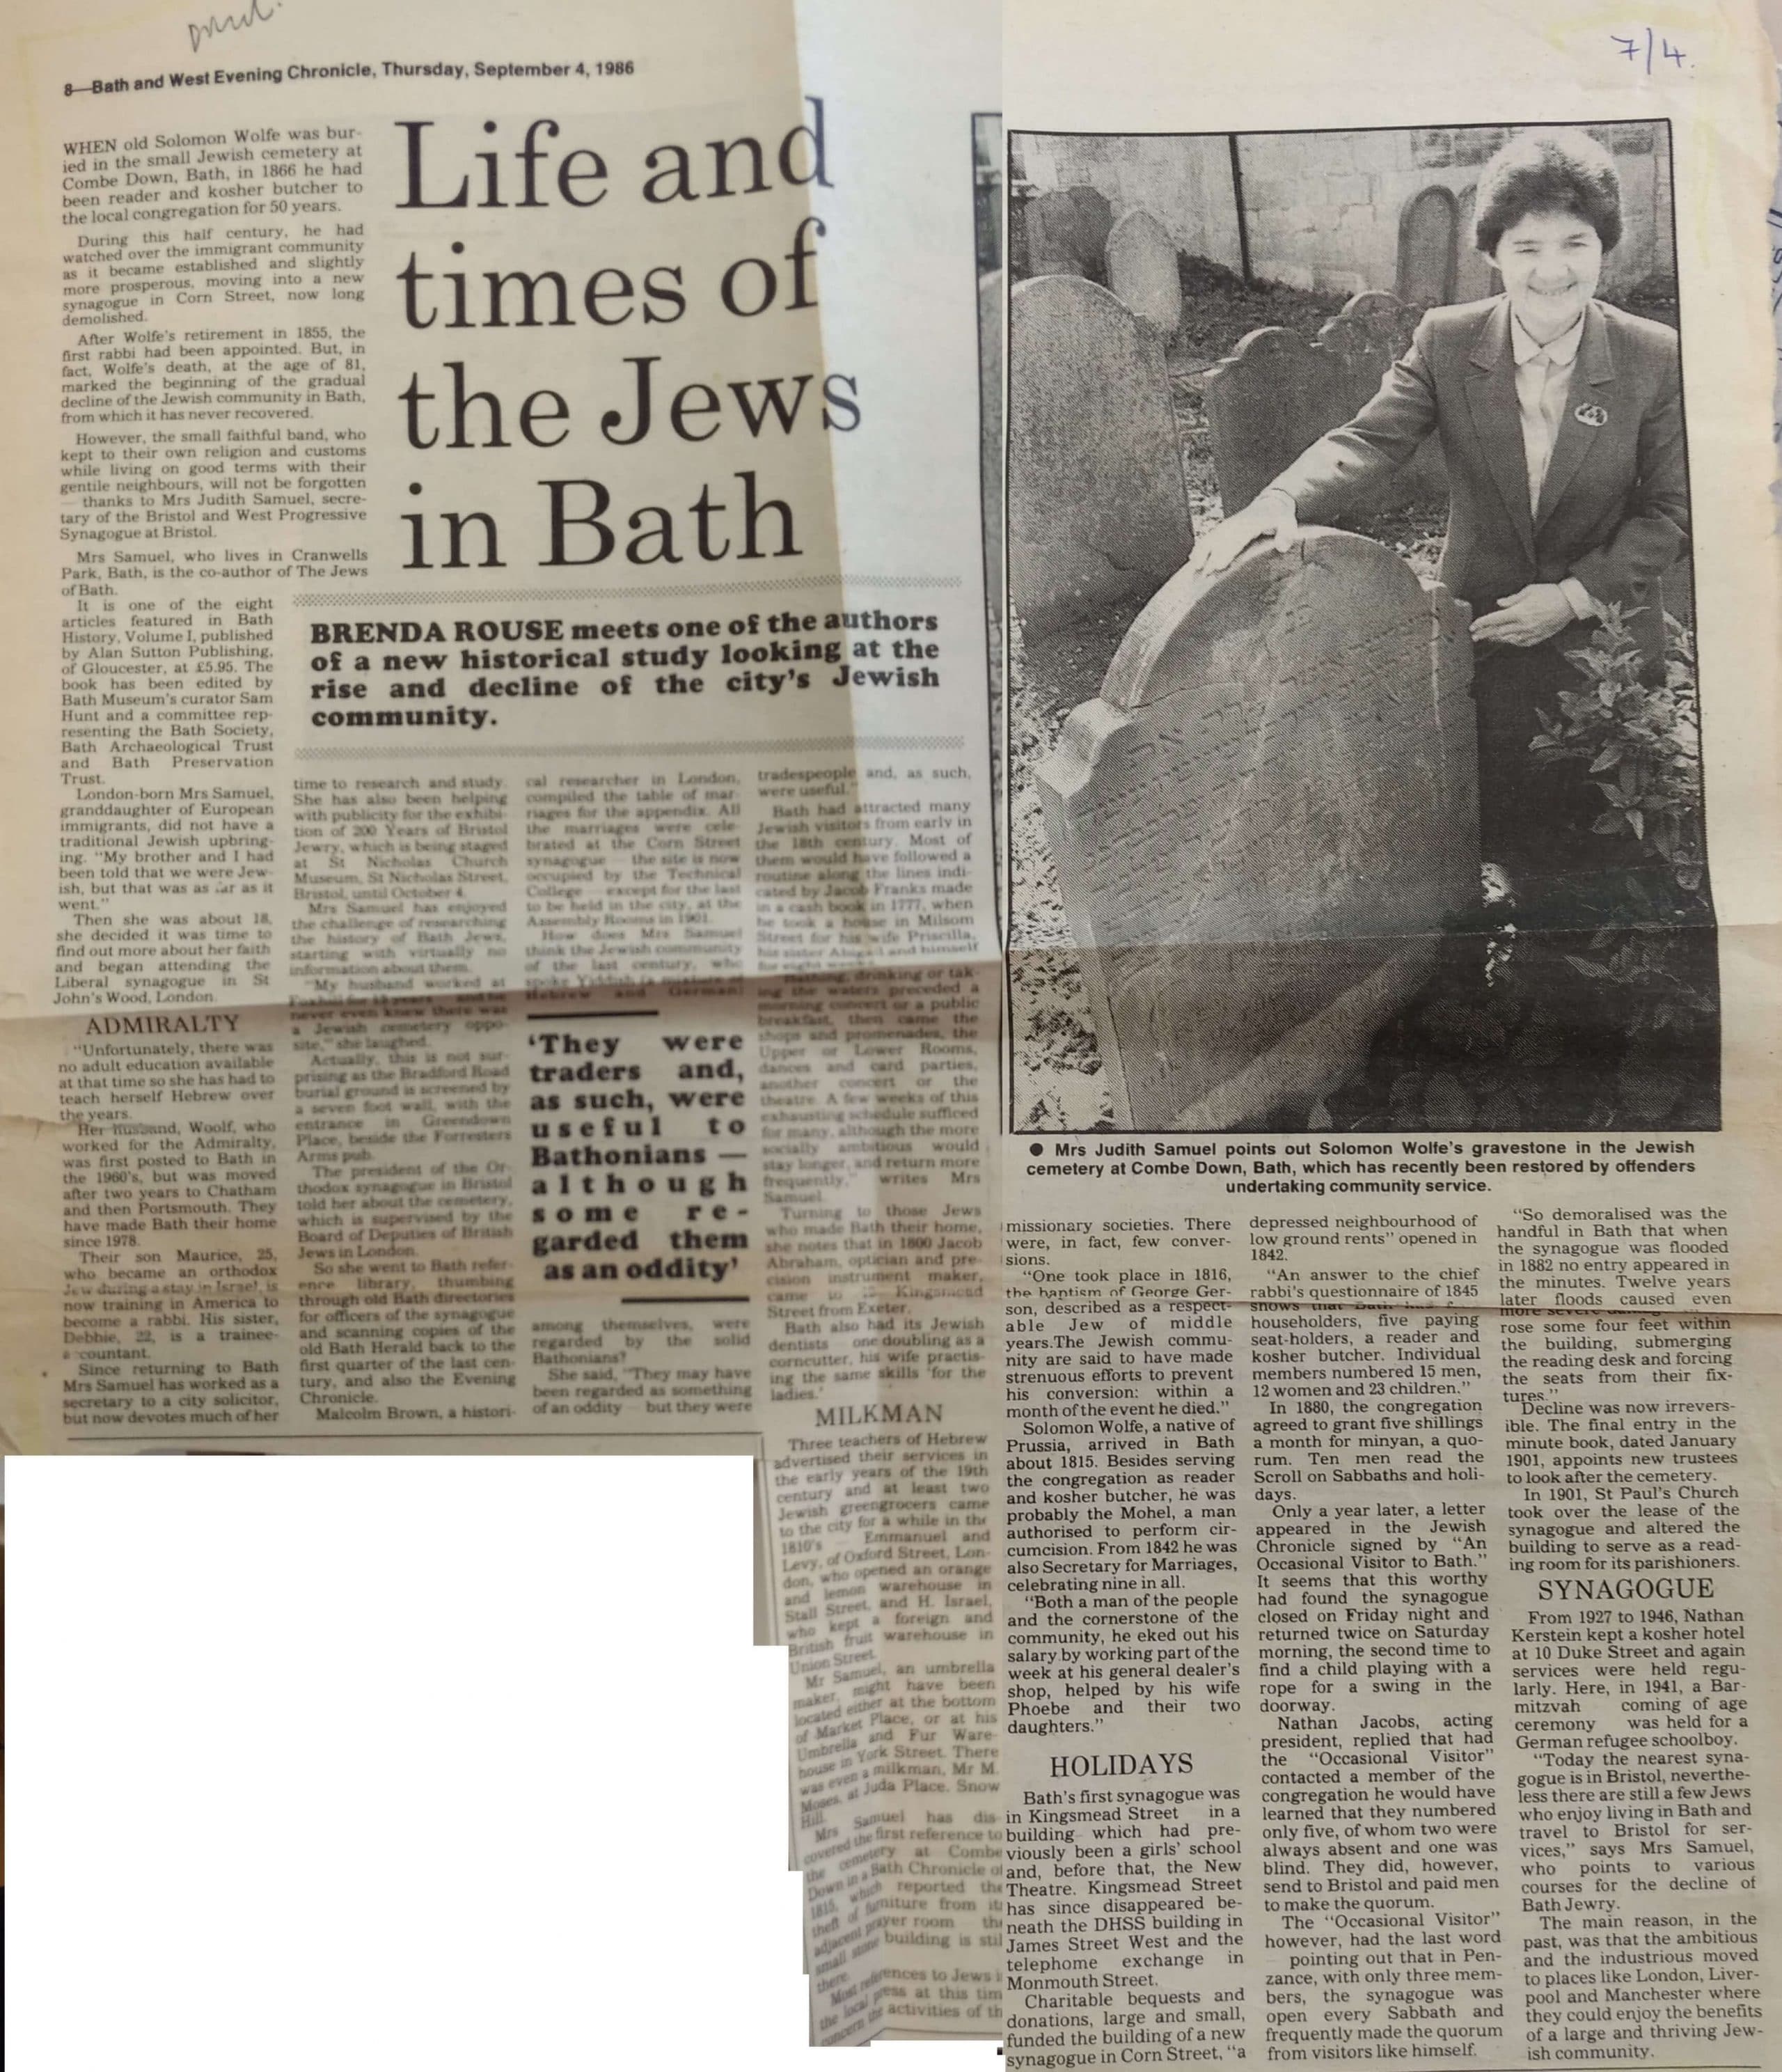 Life and times of the Jews of Bath - Bath and West Evening Chronicle - Thursday September 4 1986